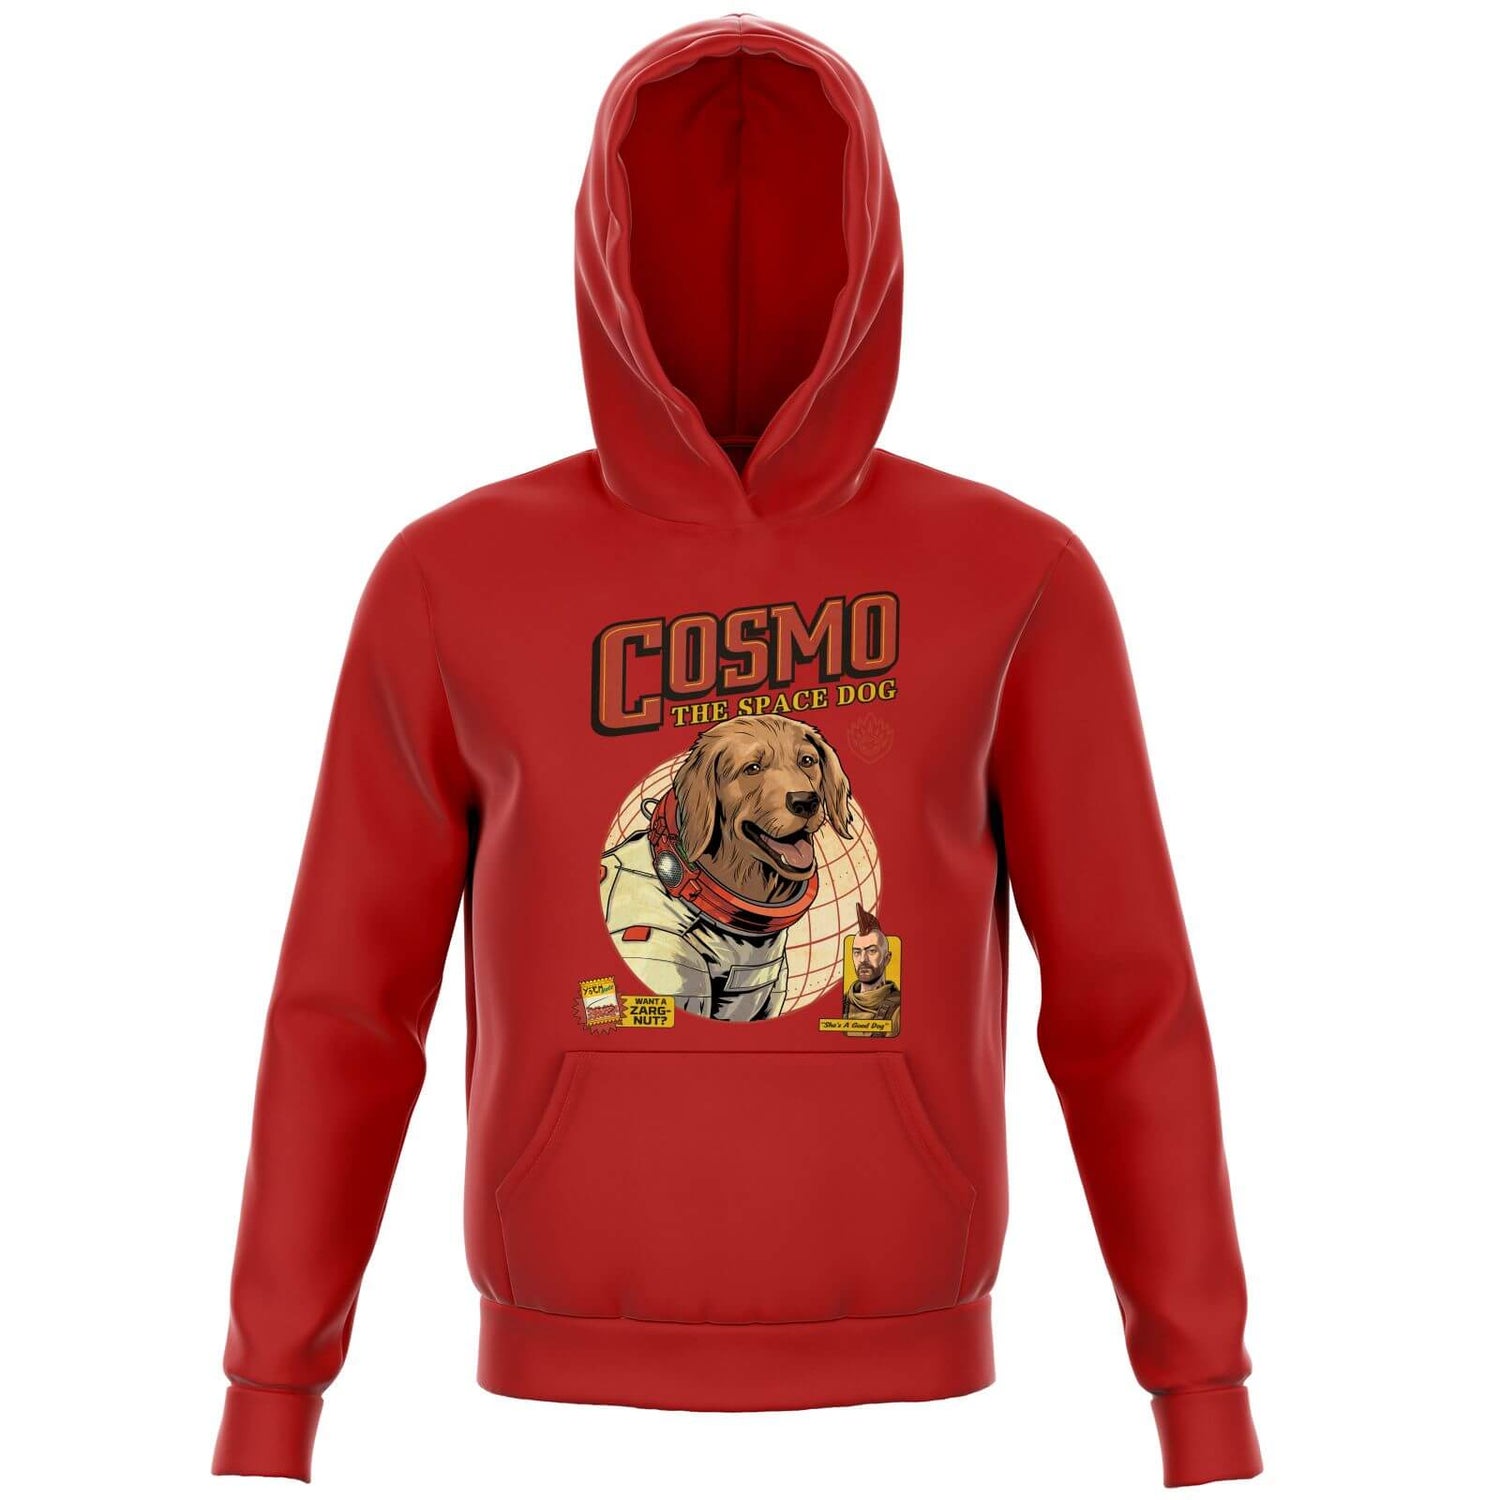 Guardians of the Galaxy Cosmo The Space Dog Kids' Hoodie - Red